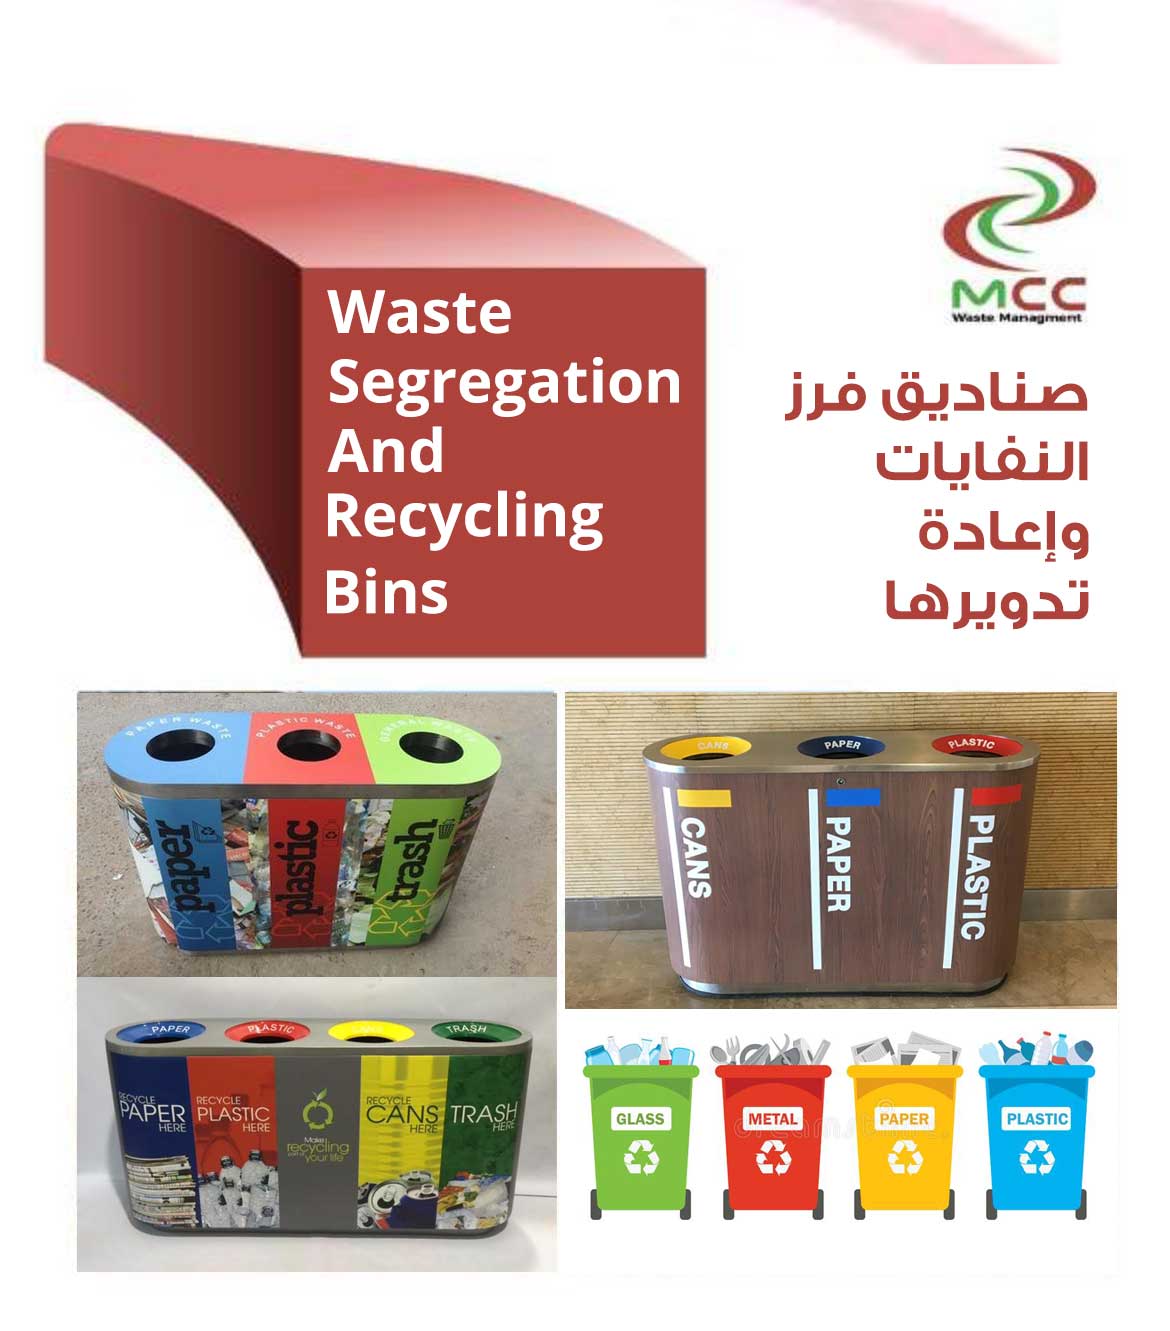 waste segregation and recycling bins v2